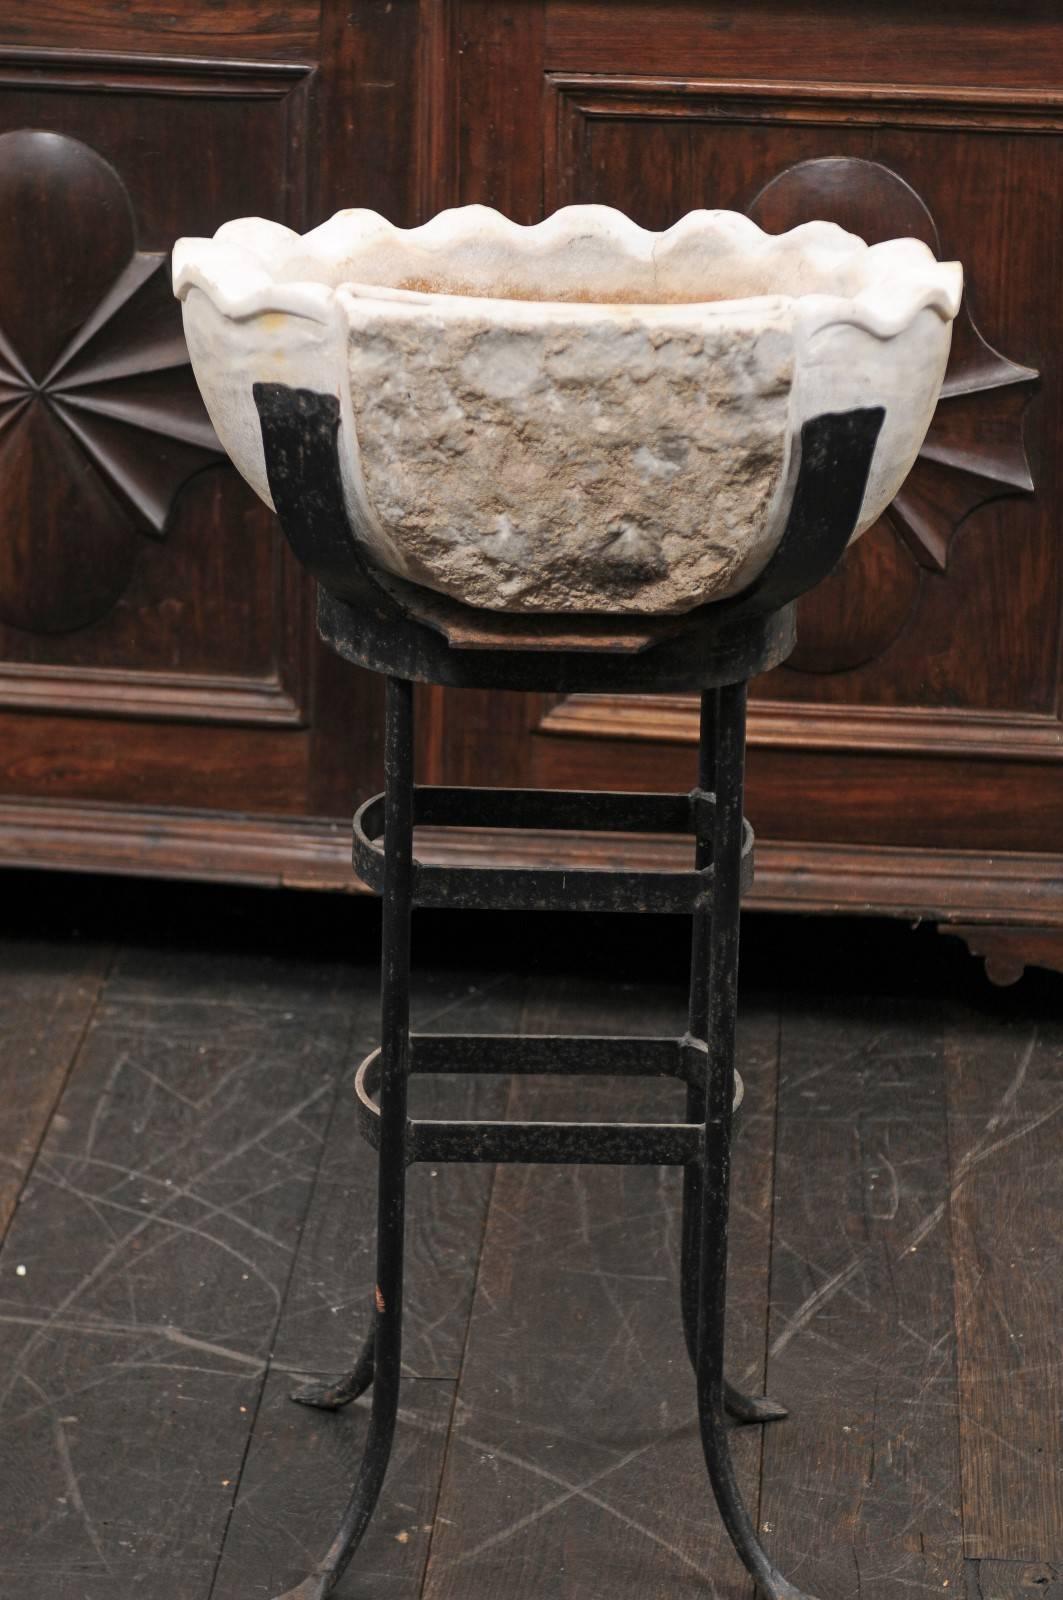 19th Century Italian Marble Sink on Metal Stand Originally Used for Holy Water 3